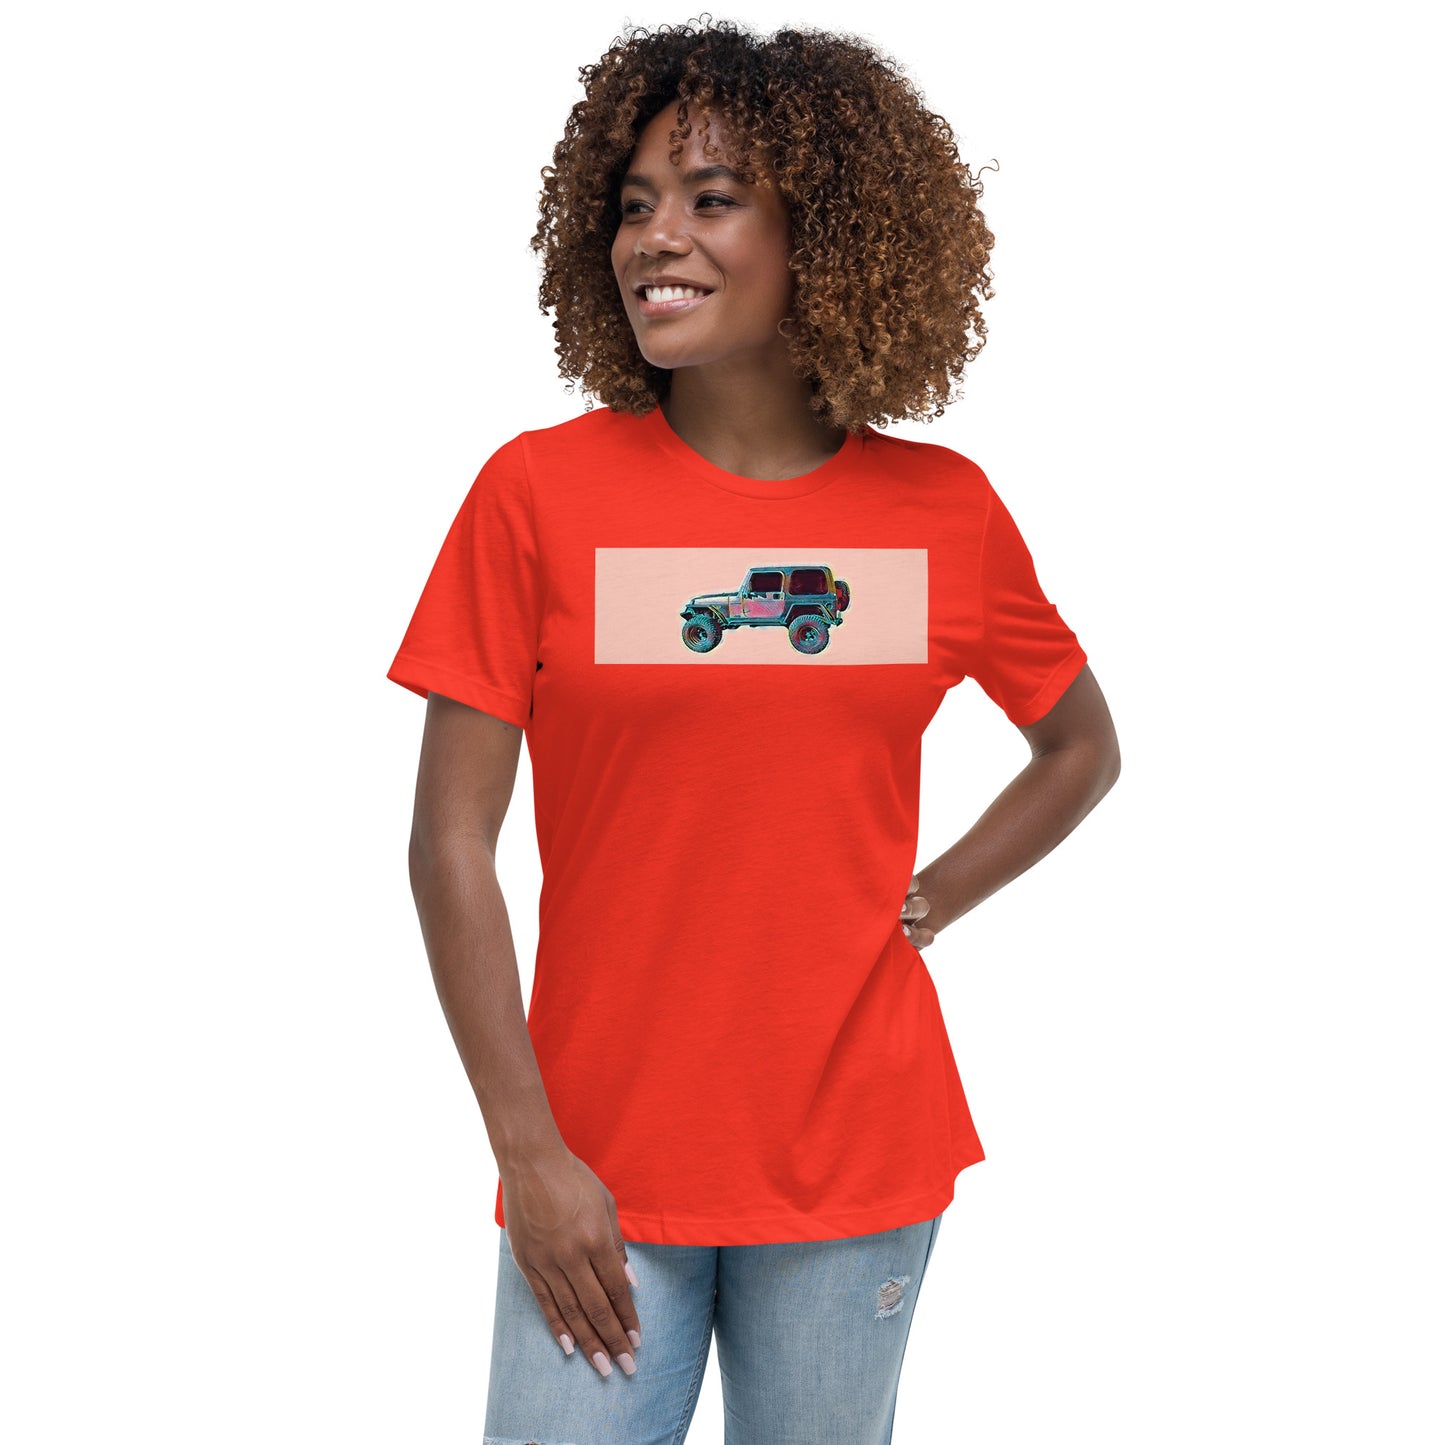 Jeep obsessions (Women's T-Shirt)